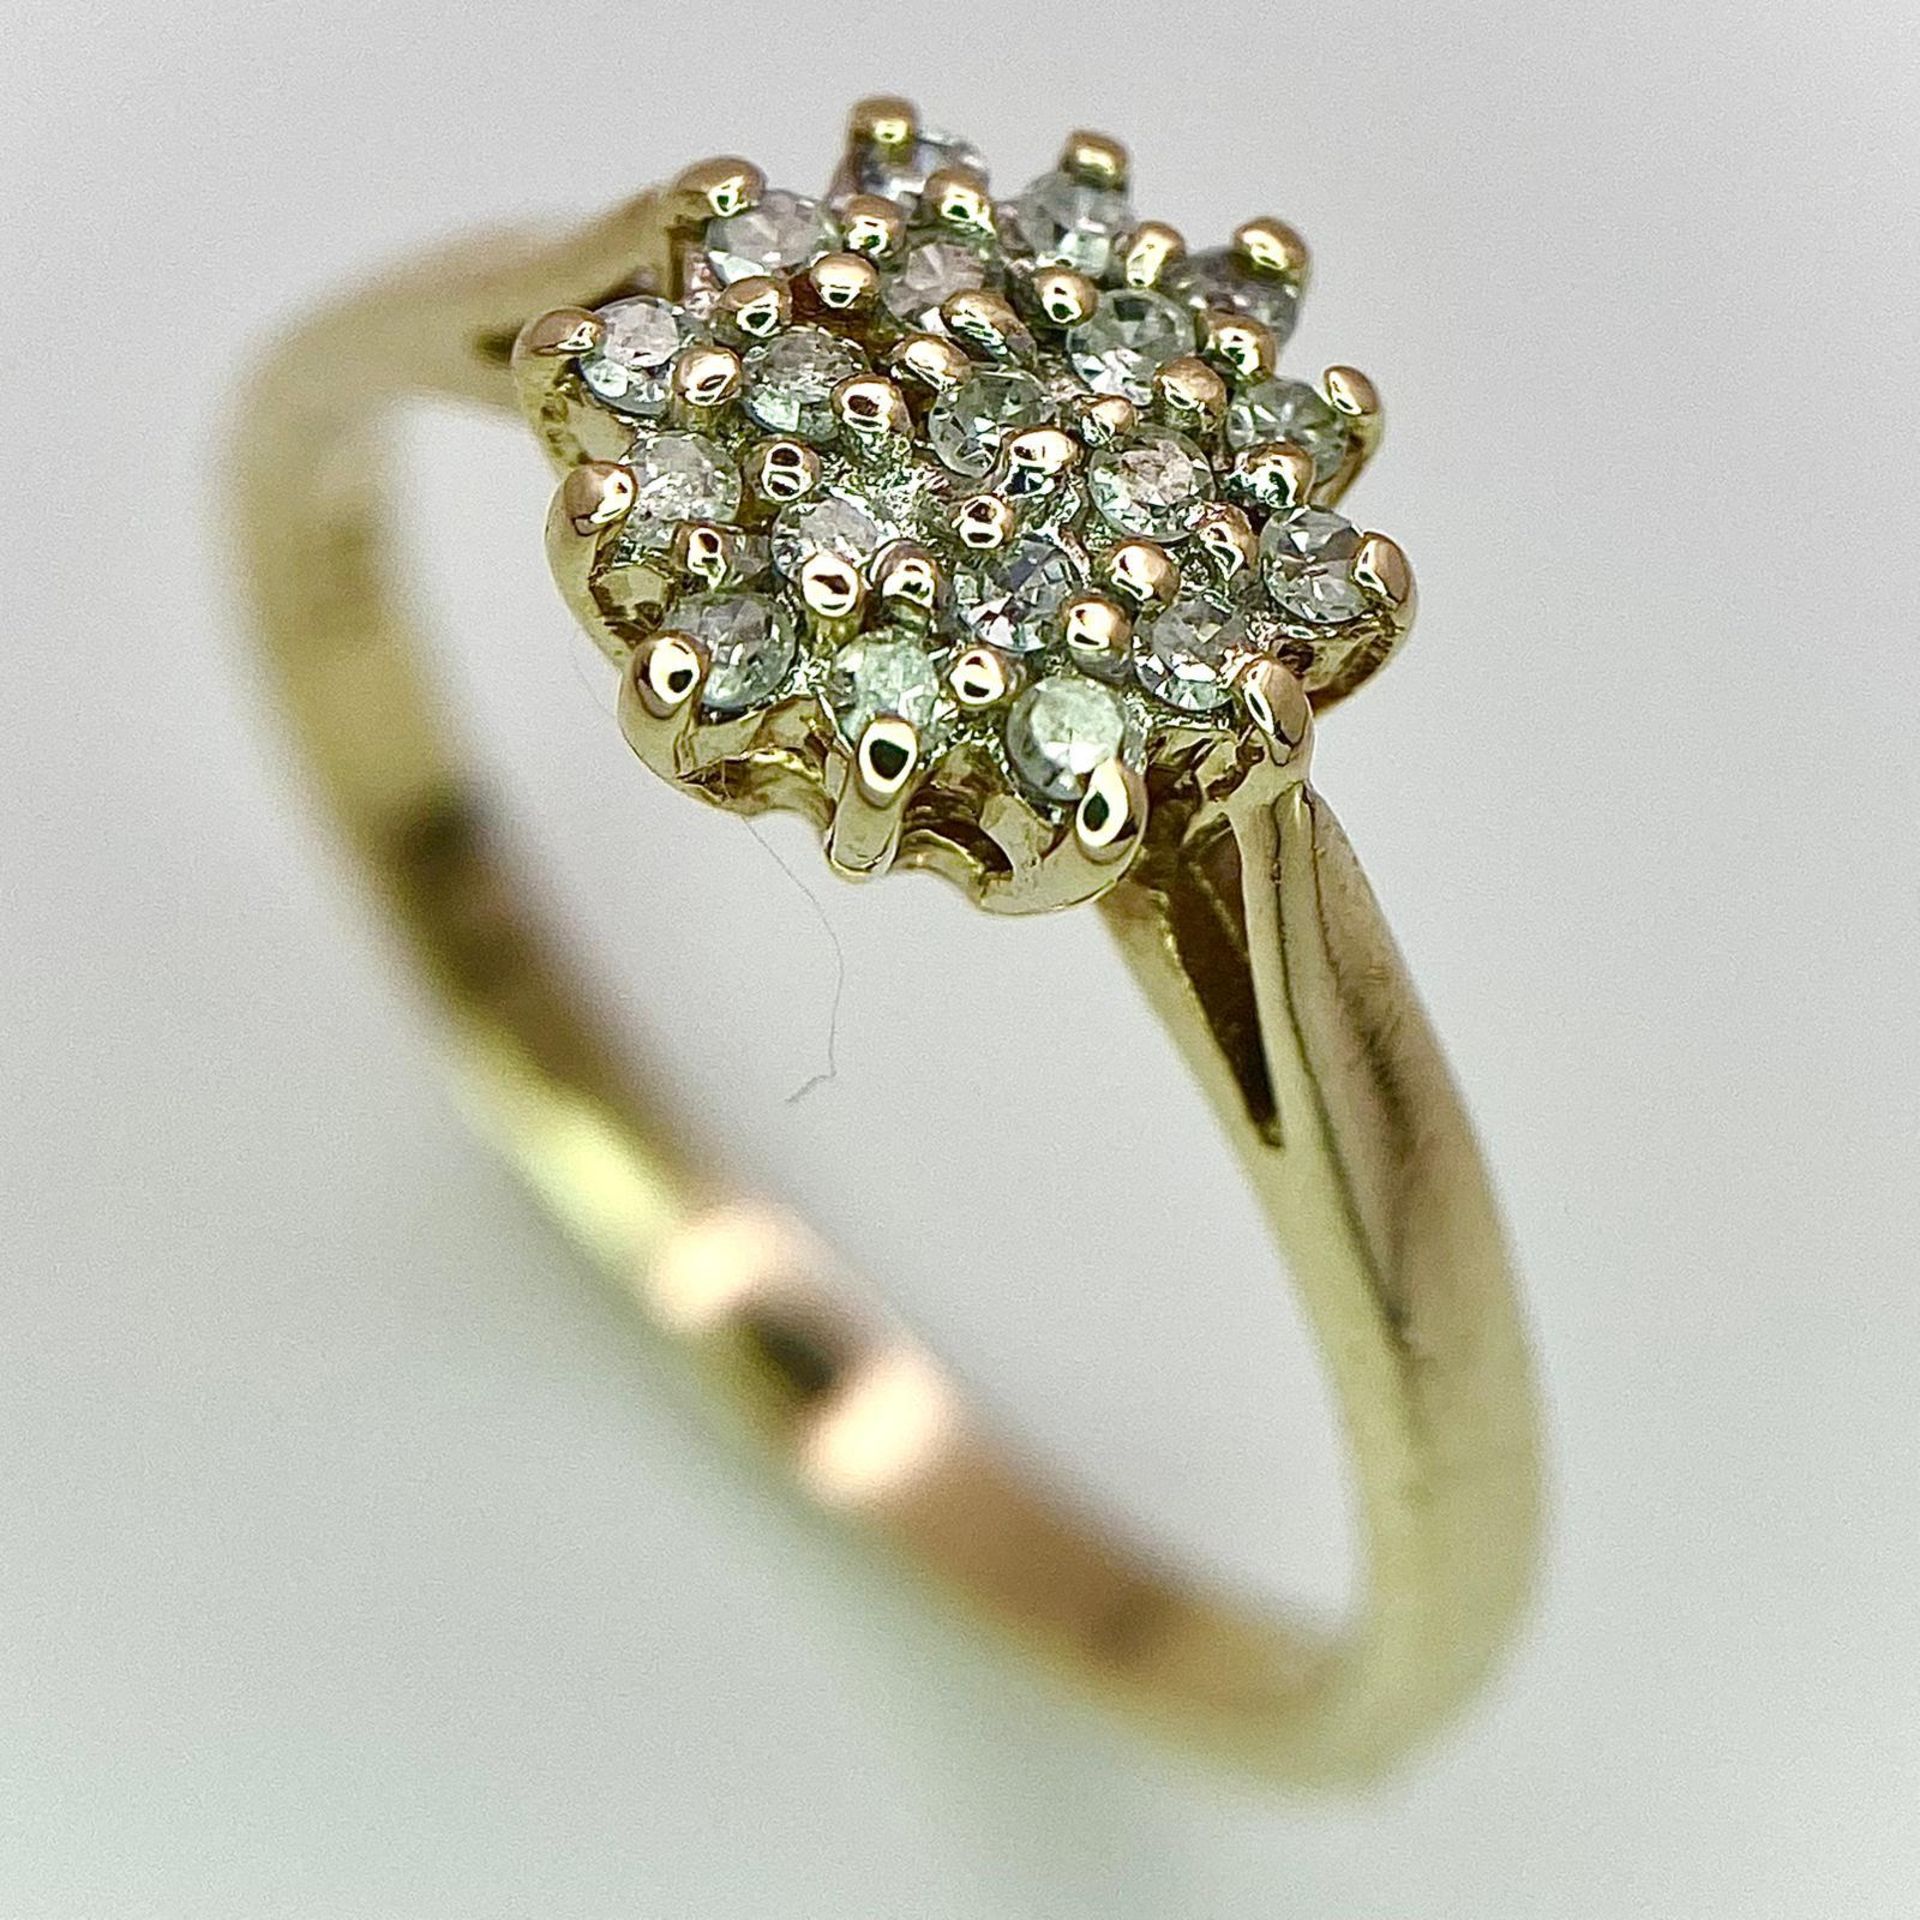 A 9K YELLOW GOLD DIAMOND CLUSTER RING. 0.15CT. 2.2G. SIZE P.